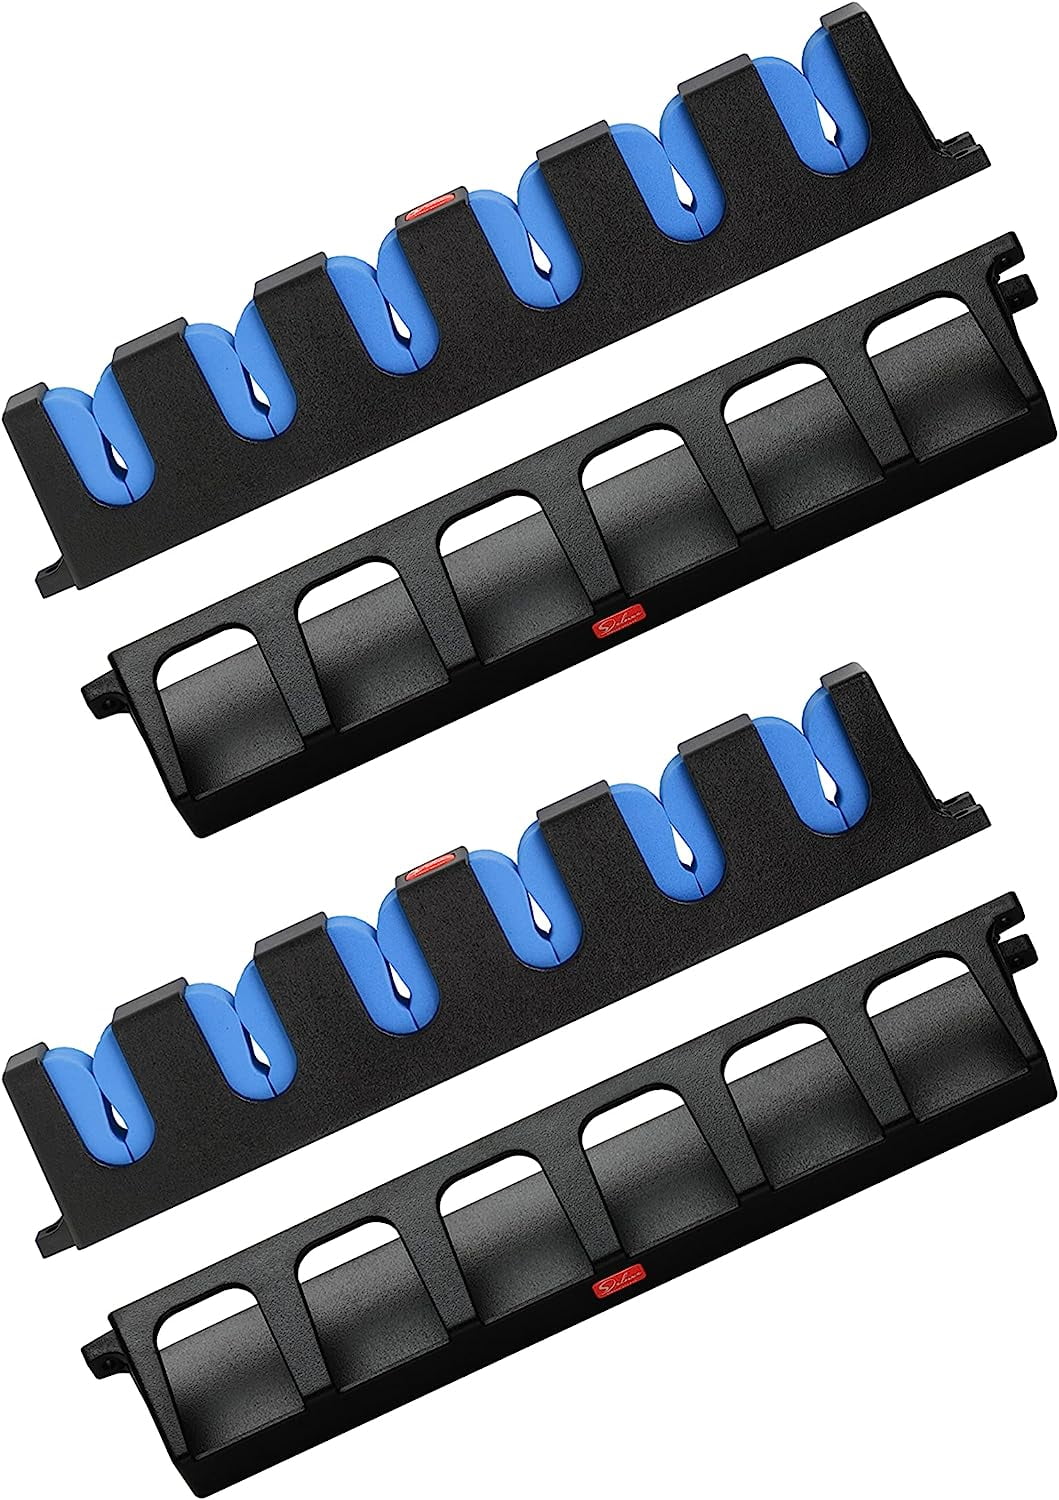  Simple Deluxe Horizontal Fishing Rod Holders Wall-Mounted – Fishing  Rod Racks, Great Fishing Pole Holder for Garage, Fishing Pole Holders Up to  6 Rods or Combos in 13.6 Inches, 1 Pair